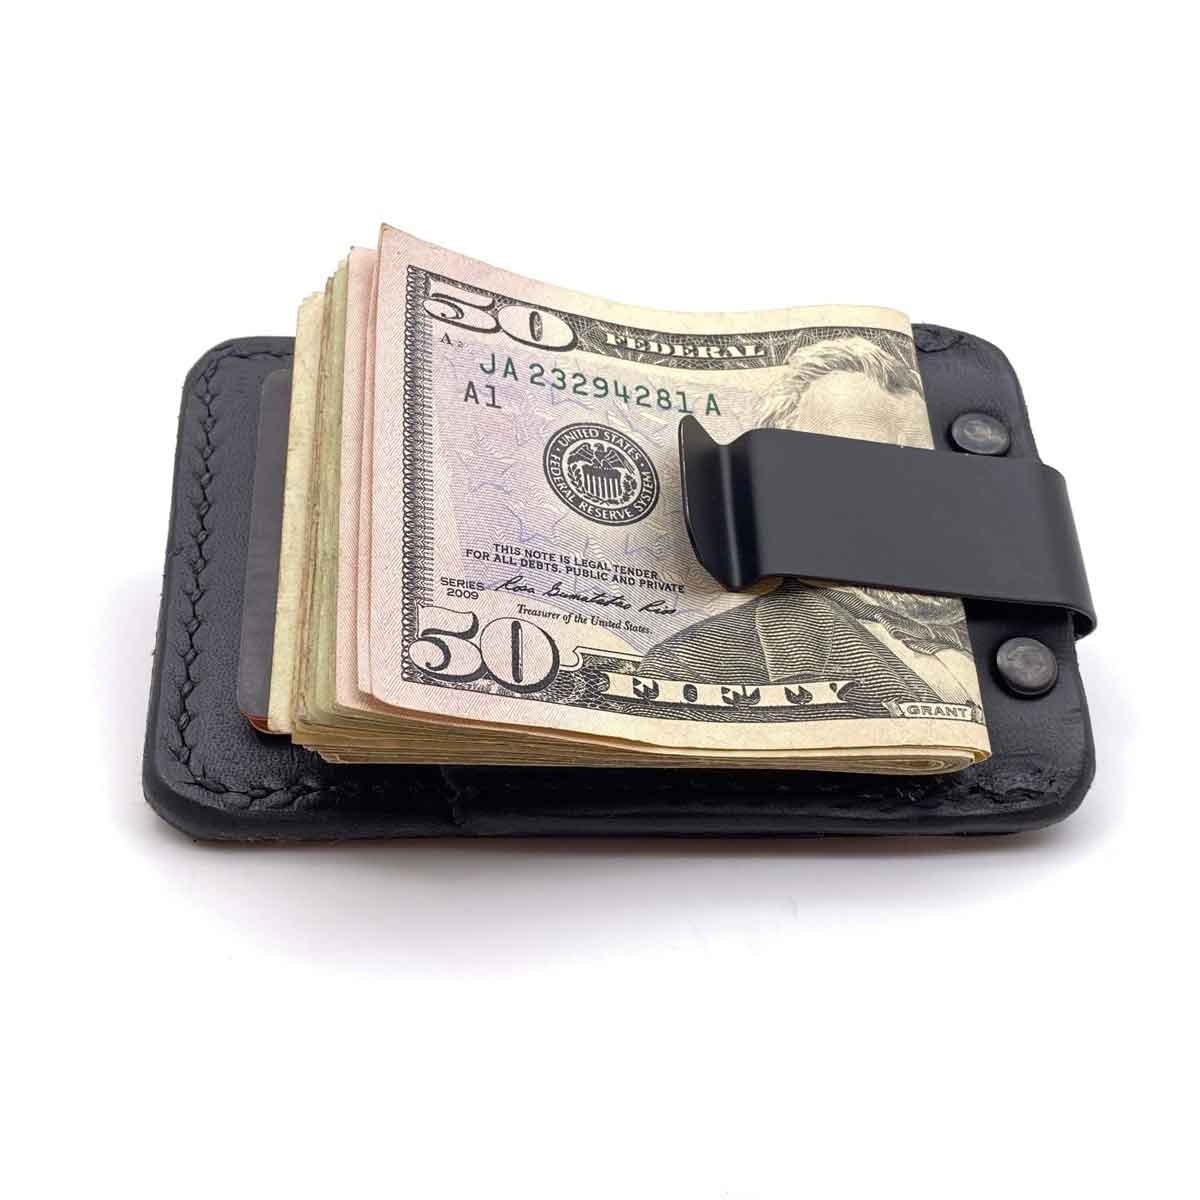 Back side of Black Bridle leather minimalist wallet with money in clip